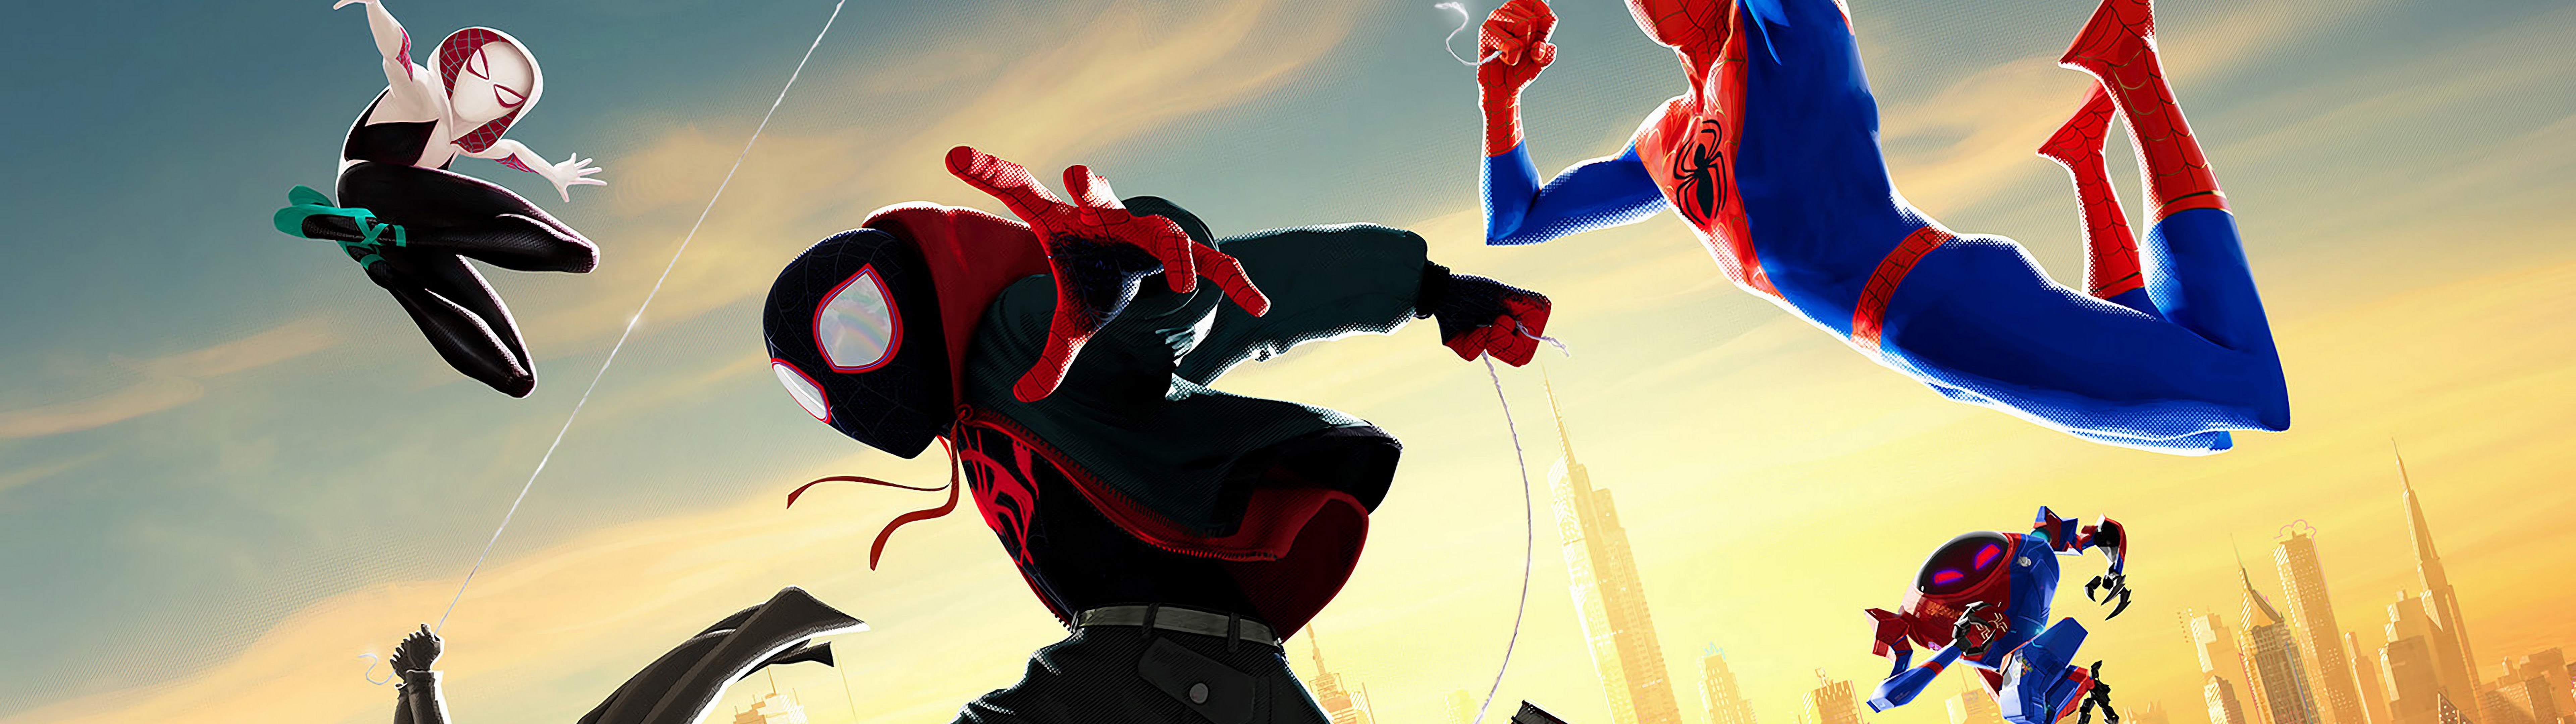 Spider Man: Into The Spider Verse Characters 4K Wallpaper